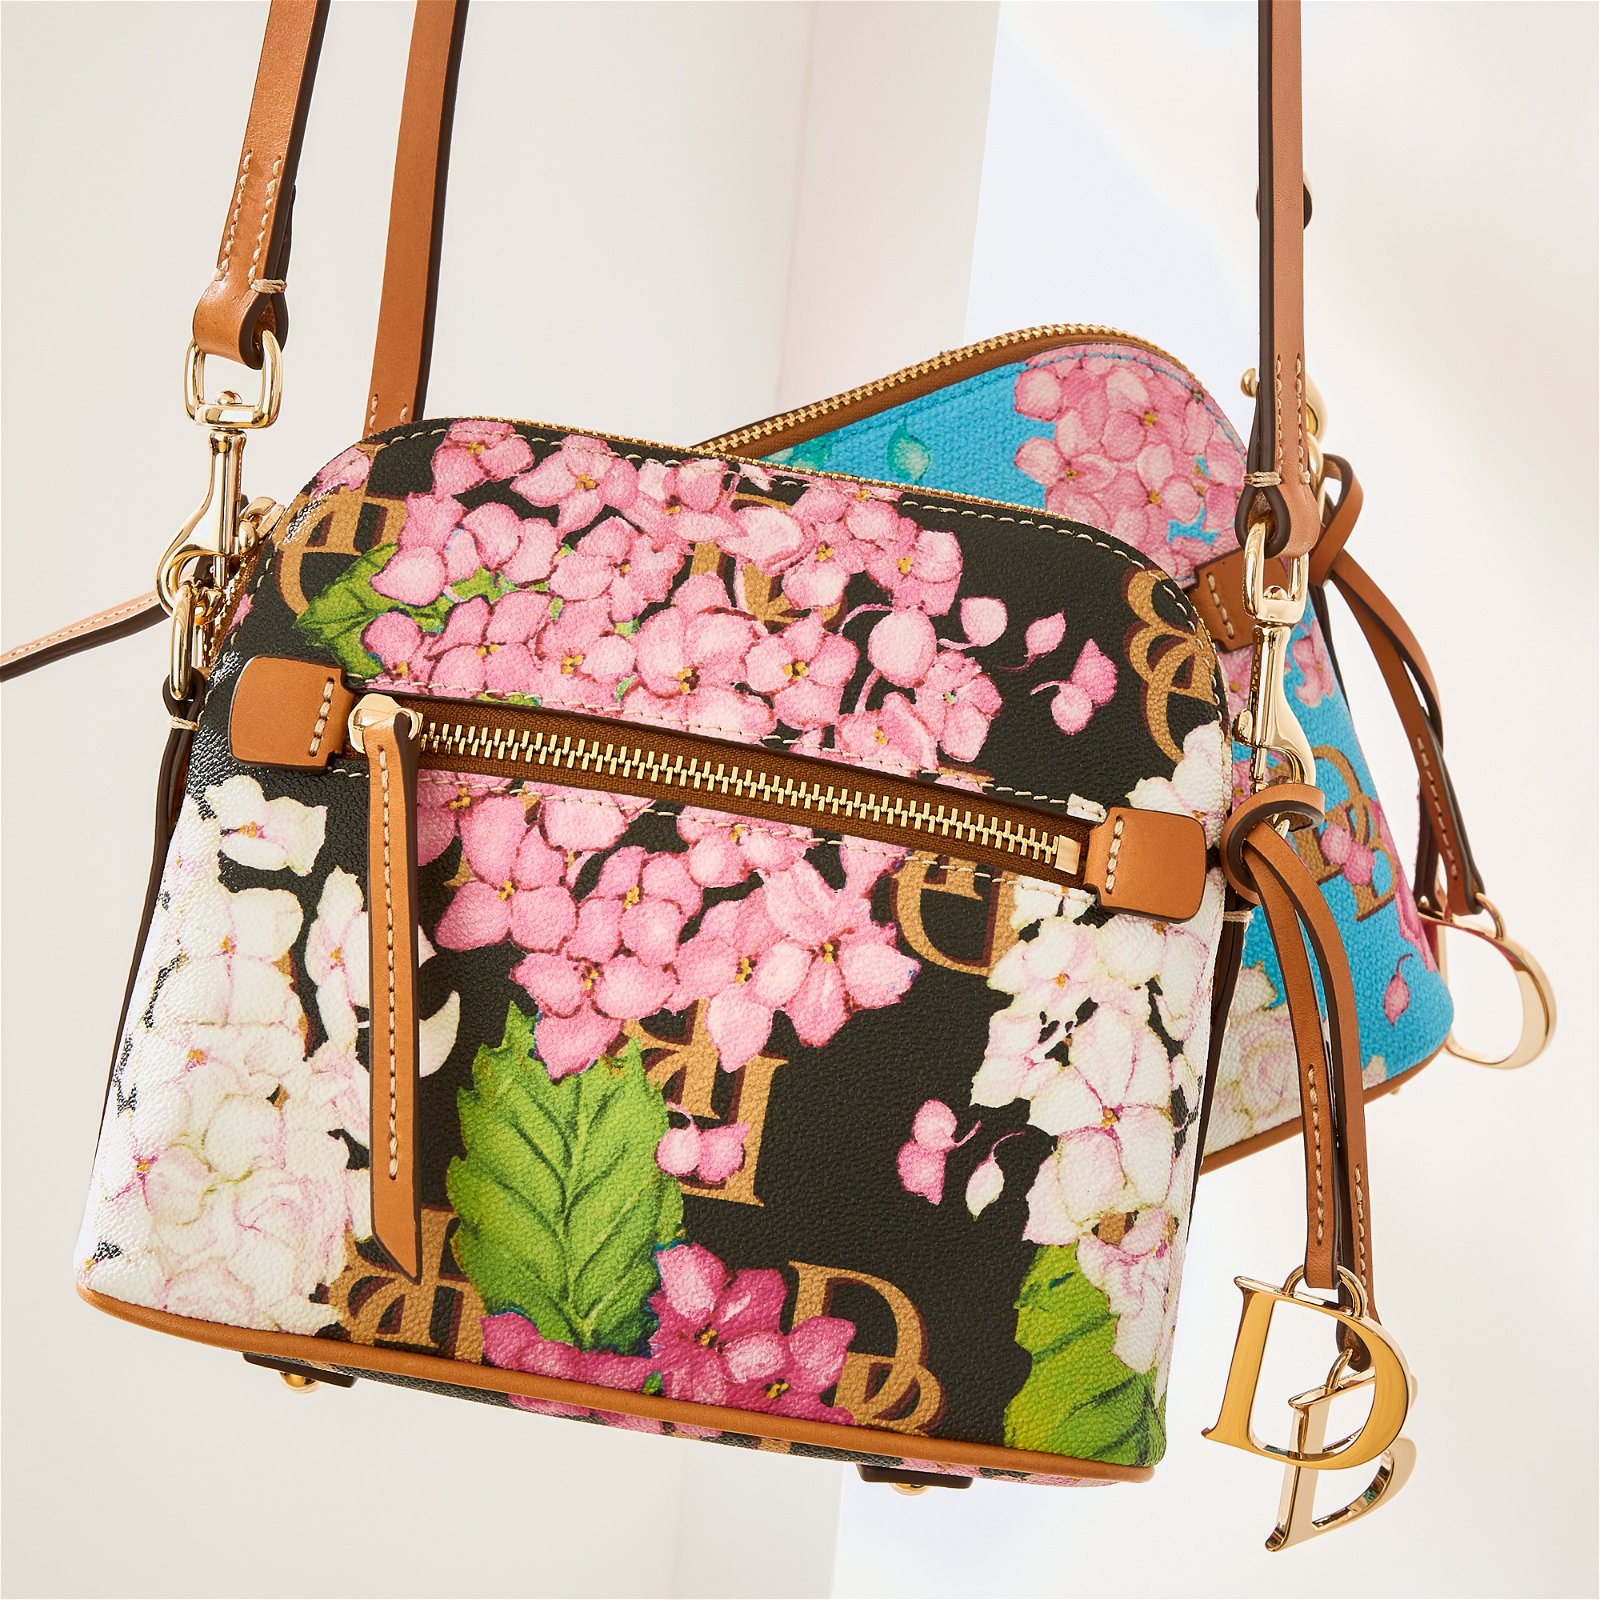 Dooney & Bourke sale: Get the brand's iconic purses for up to 65% off